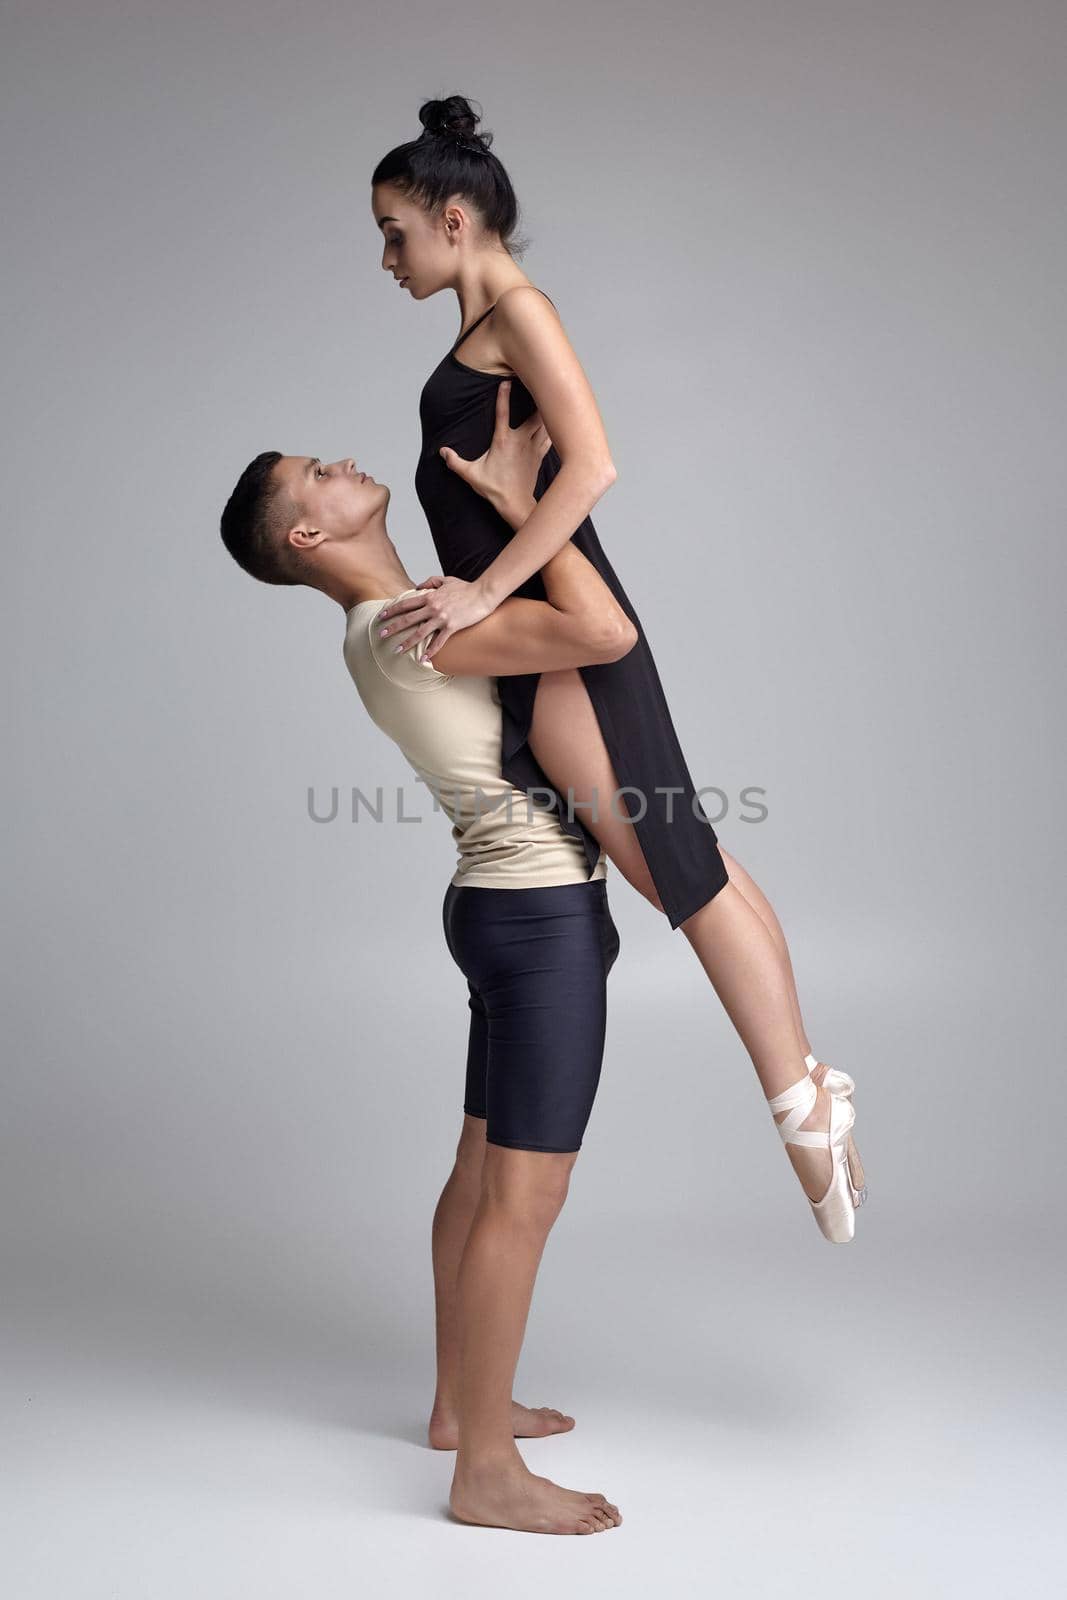 Couple of a young ballet dancers are posing over a gray studio background. Handsome man in black shorts with beige t-shirt is holding a beautiful woman in a black dress and white pointe shoes in his strong hands. Ballet and contemporary choreography concept. Art photo.